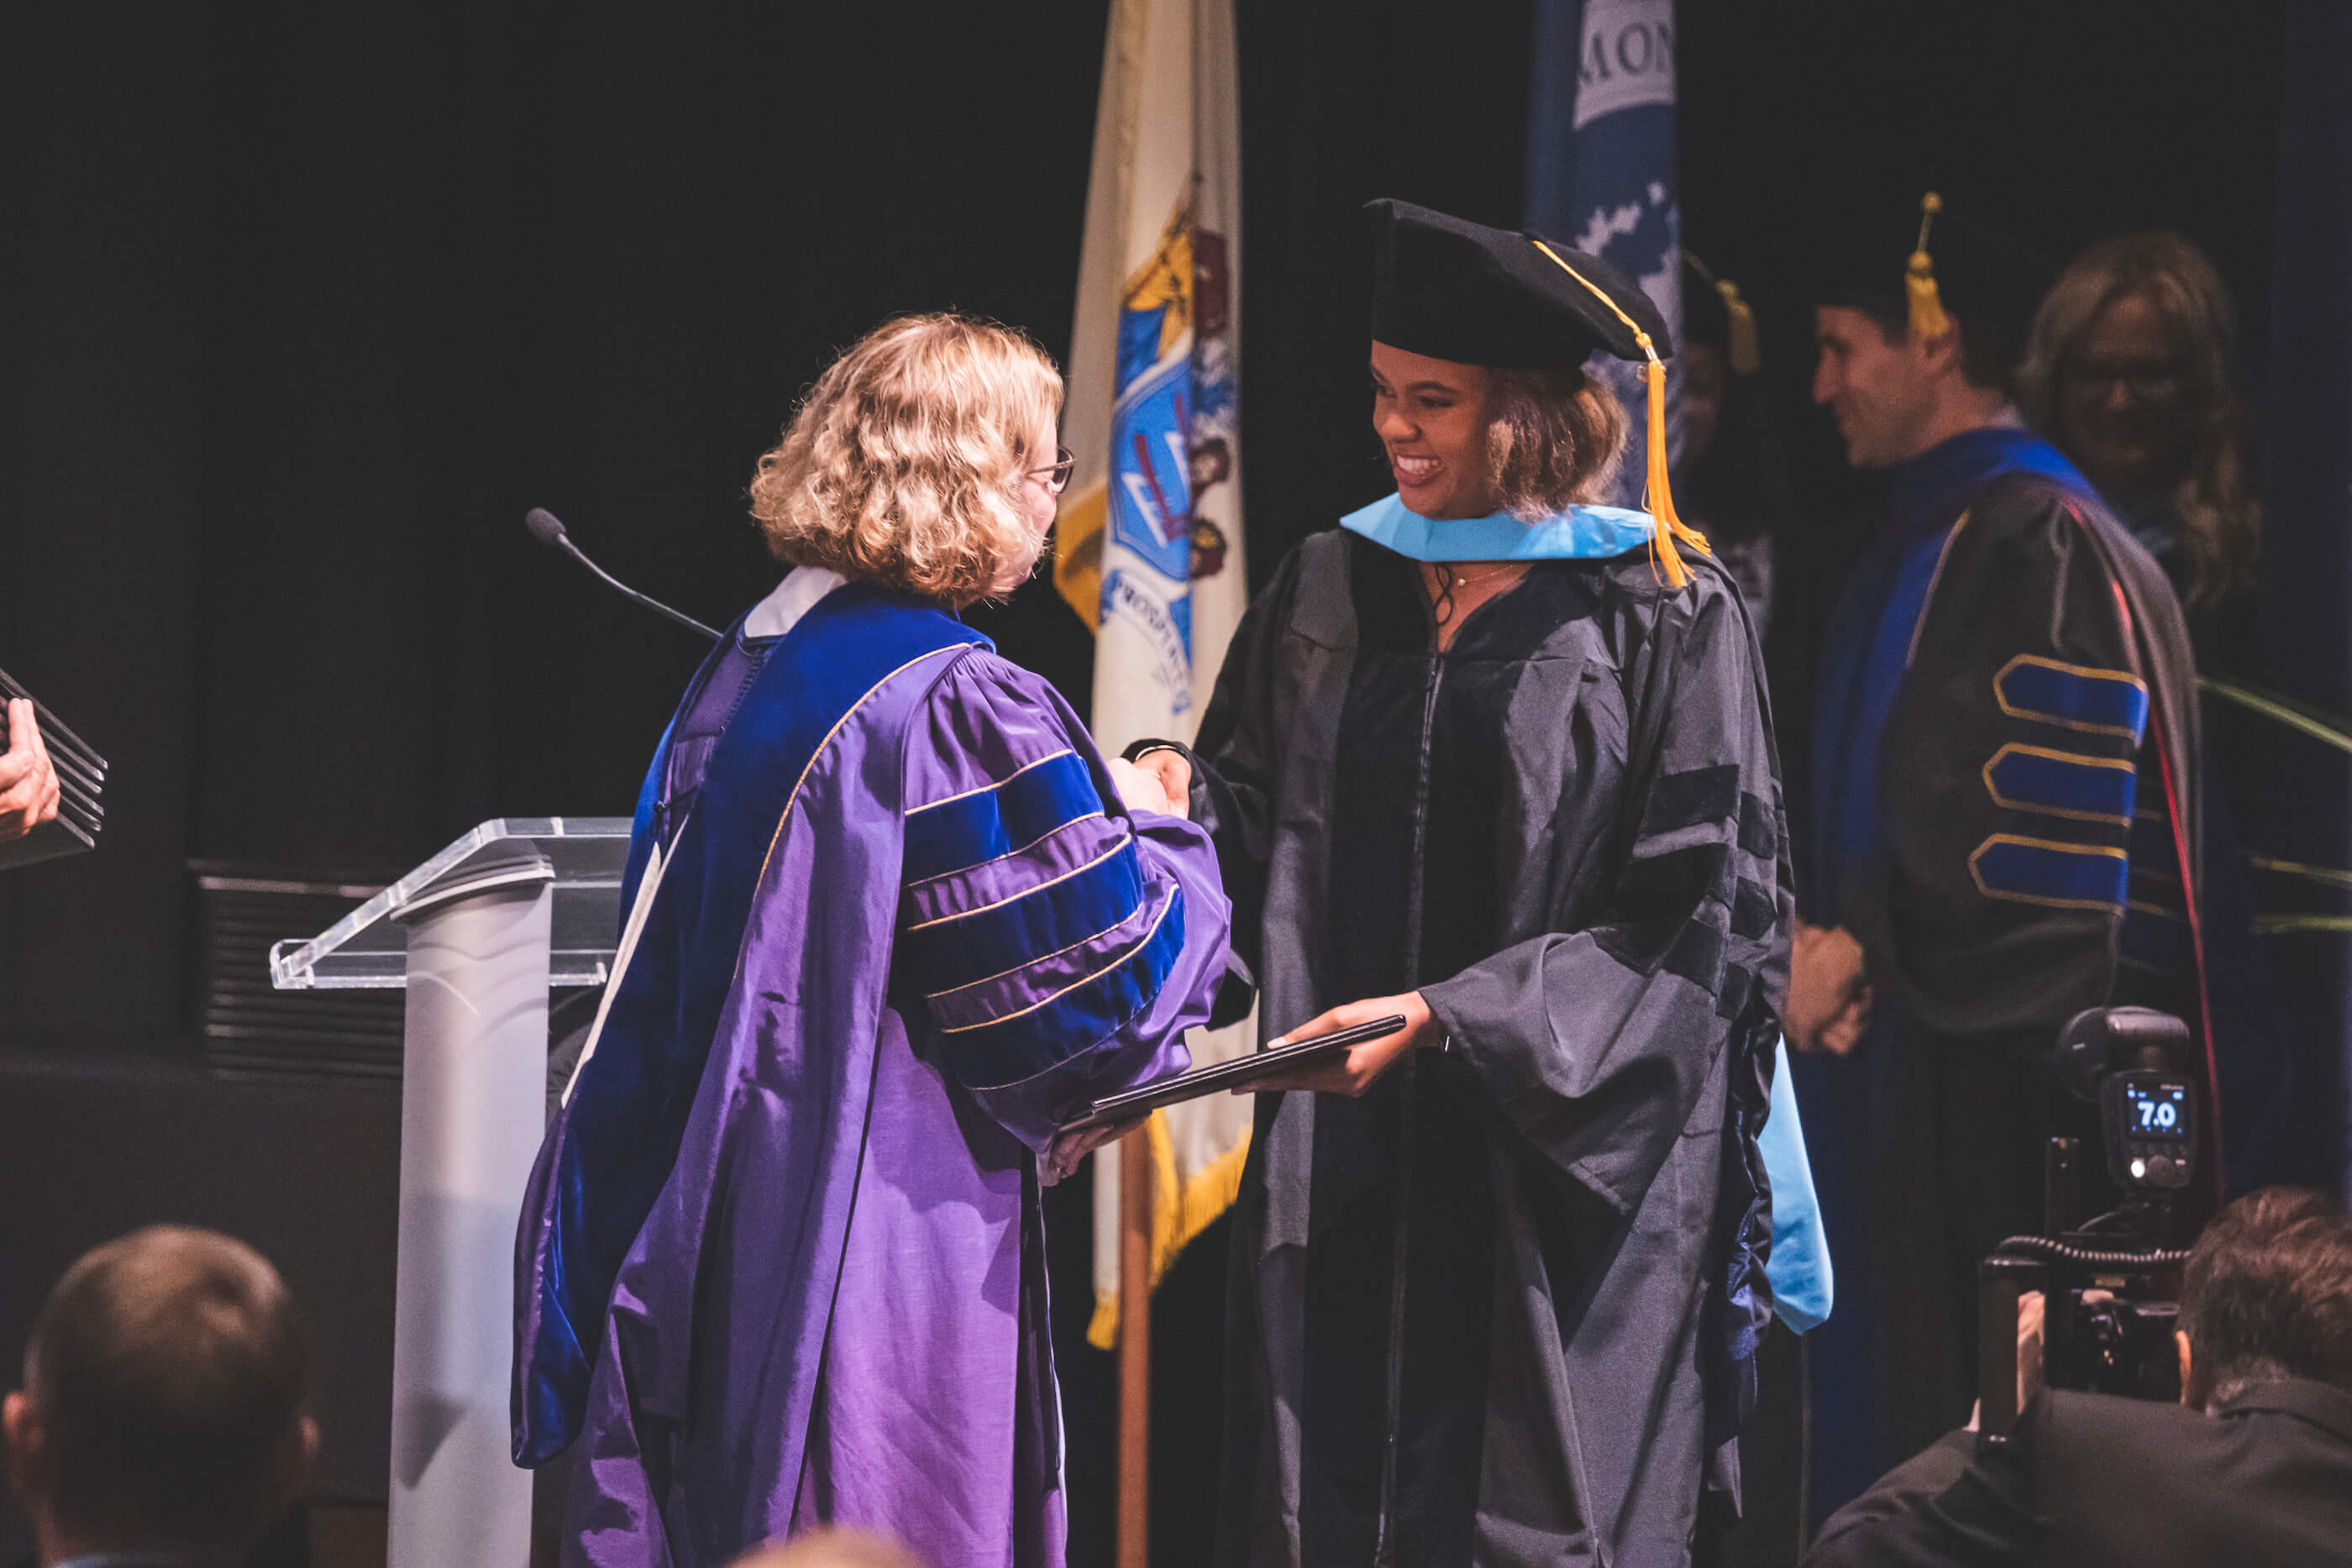 Graduate in cap and gown, smiling while she accepts a degree from a member of the faculty, who is wearing a purple and blue doctoral robe.